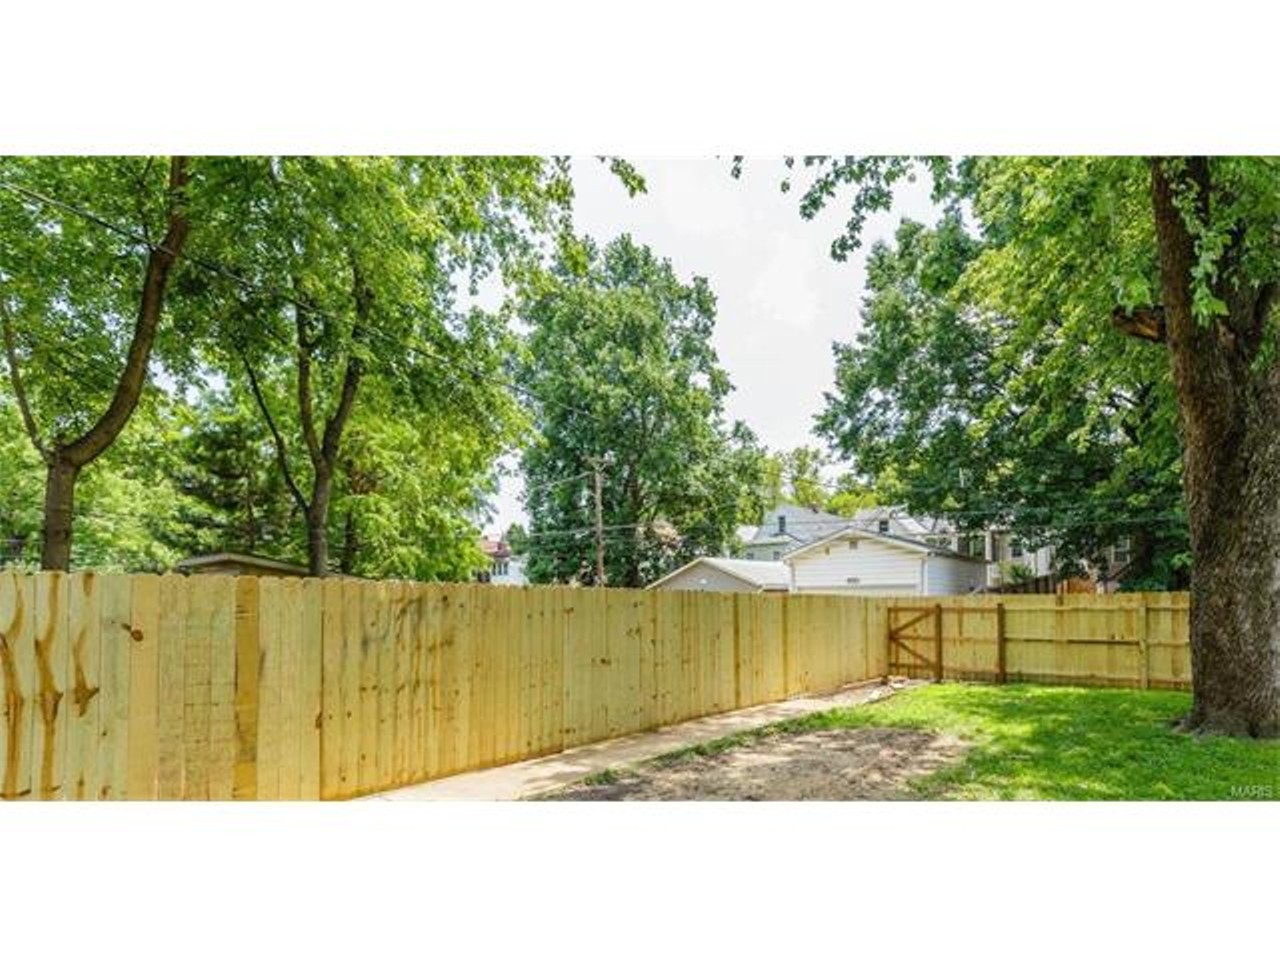 And here's what could be your future backyard -- complete with a new fence.